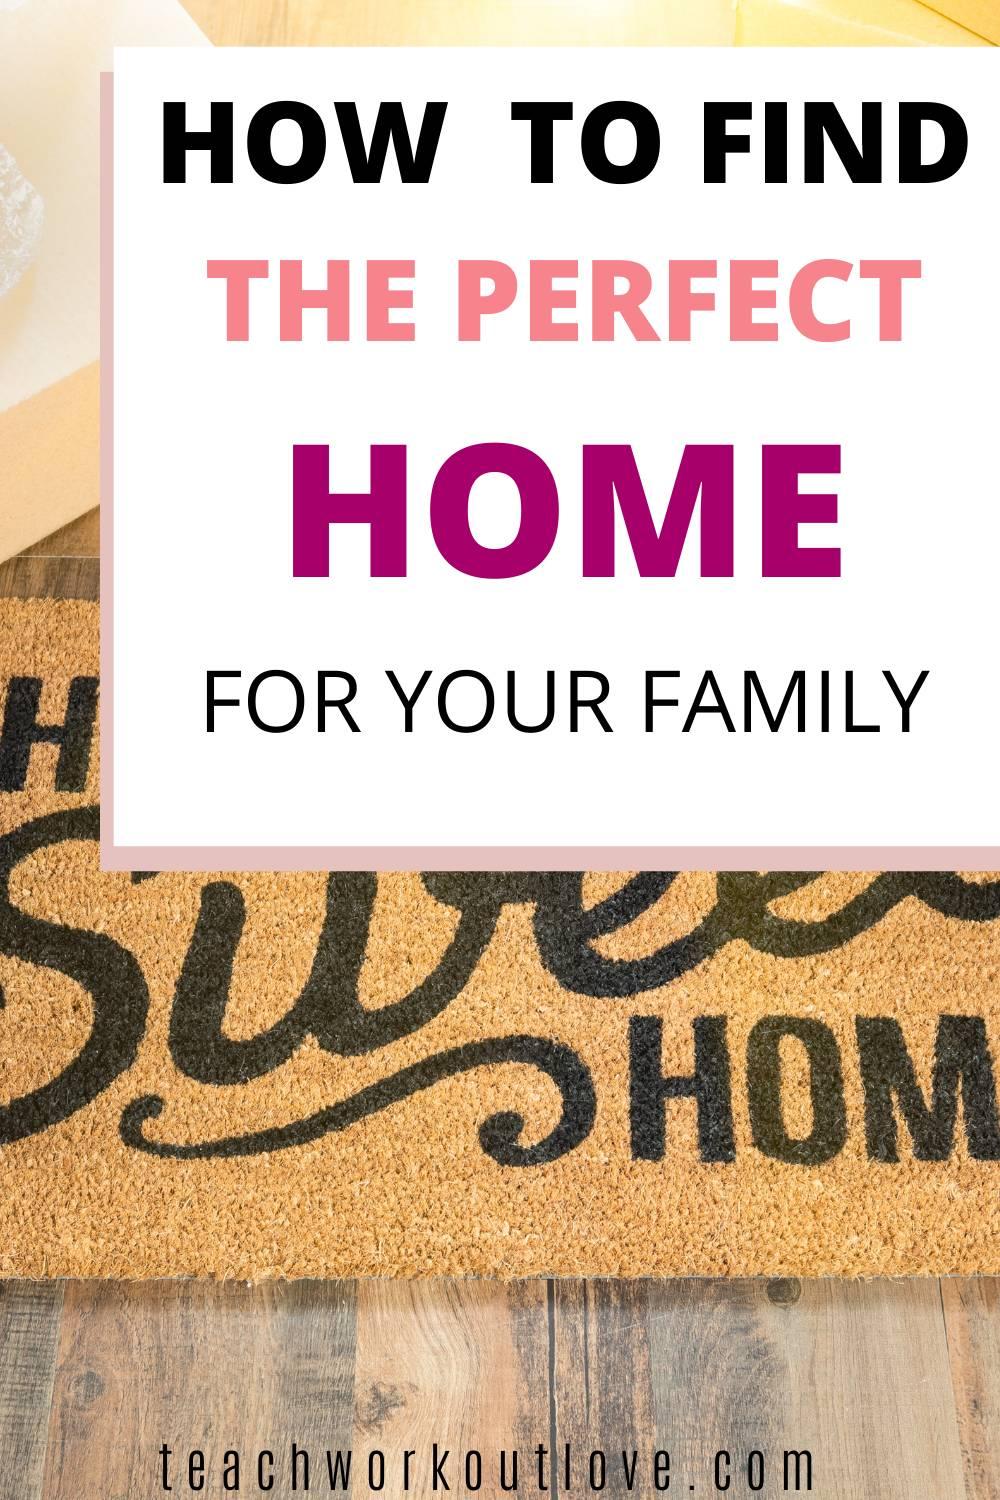 When you’re looking for the perfect family home, you must find the right home. If you need some help doing this, keep reading to learn about four things to look for.